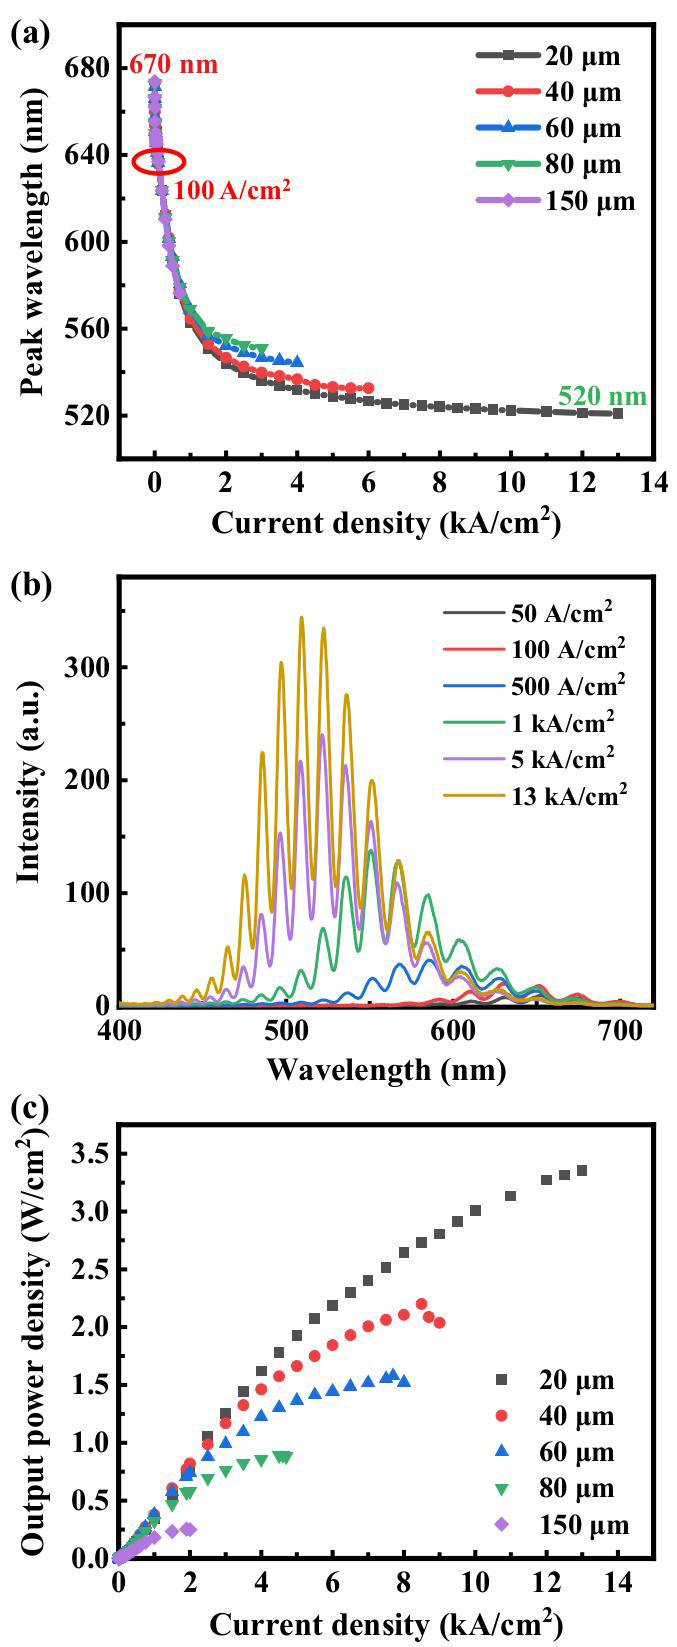 Figure 2: (a) EL peak wavelength versus current density for all chip sizes. (b) EL spectra of 20μm pixel from 50A/cm2 to 13,000A/cm2. (c) Light output power density versus injection current density for all chip sizes. 